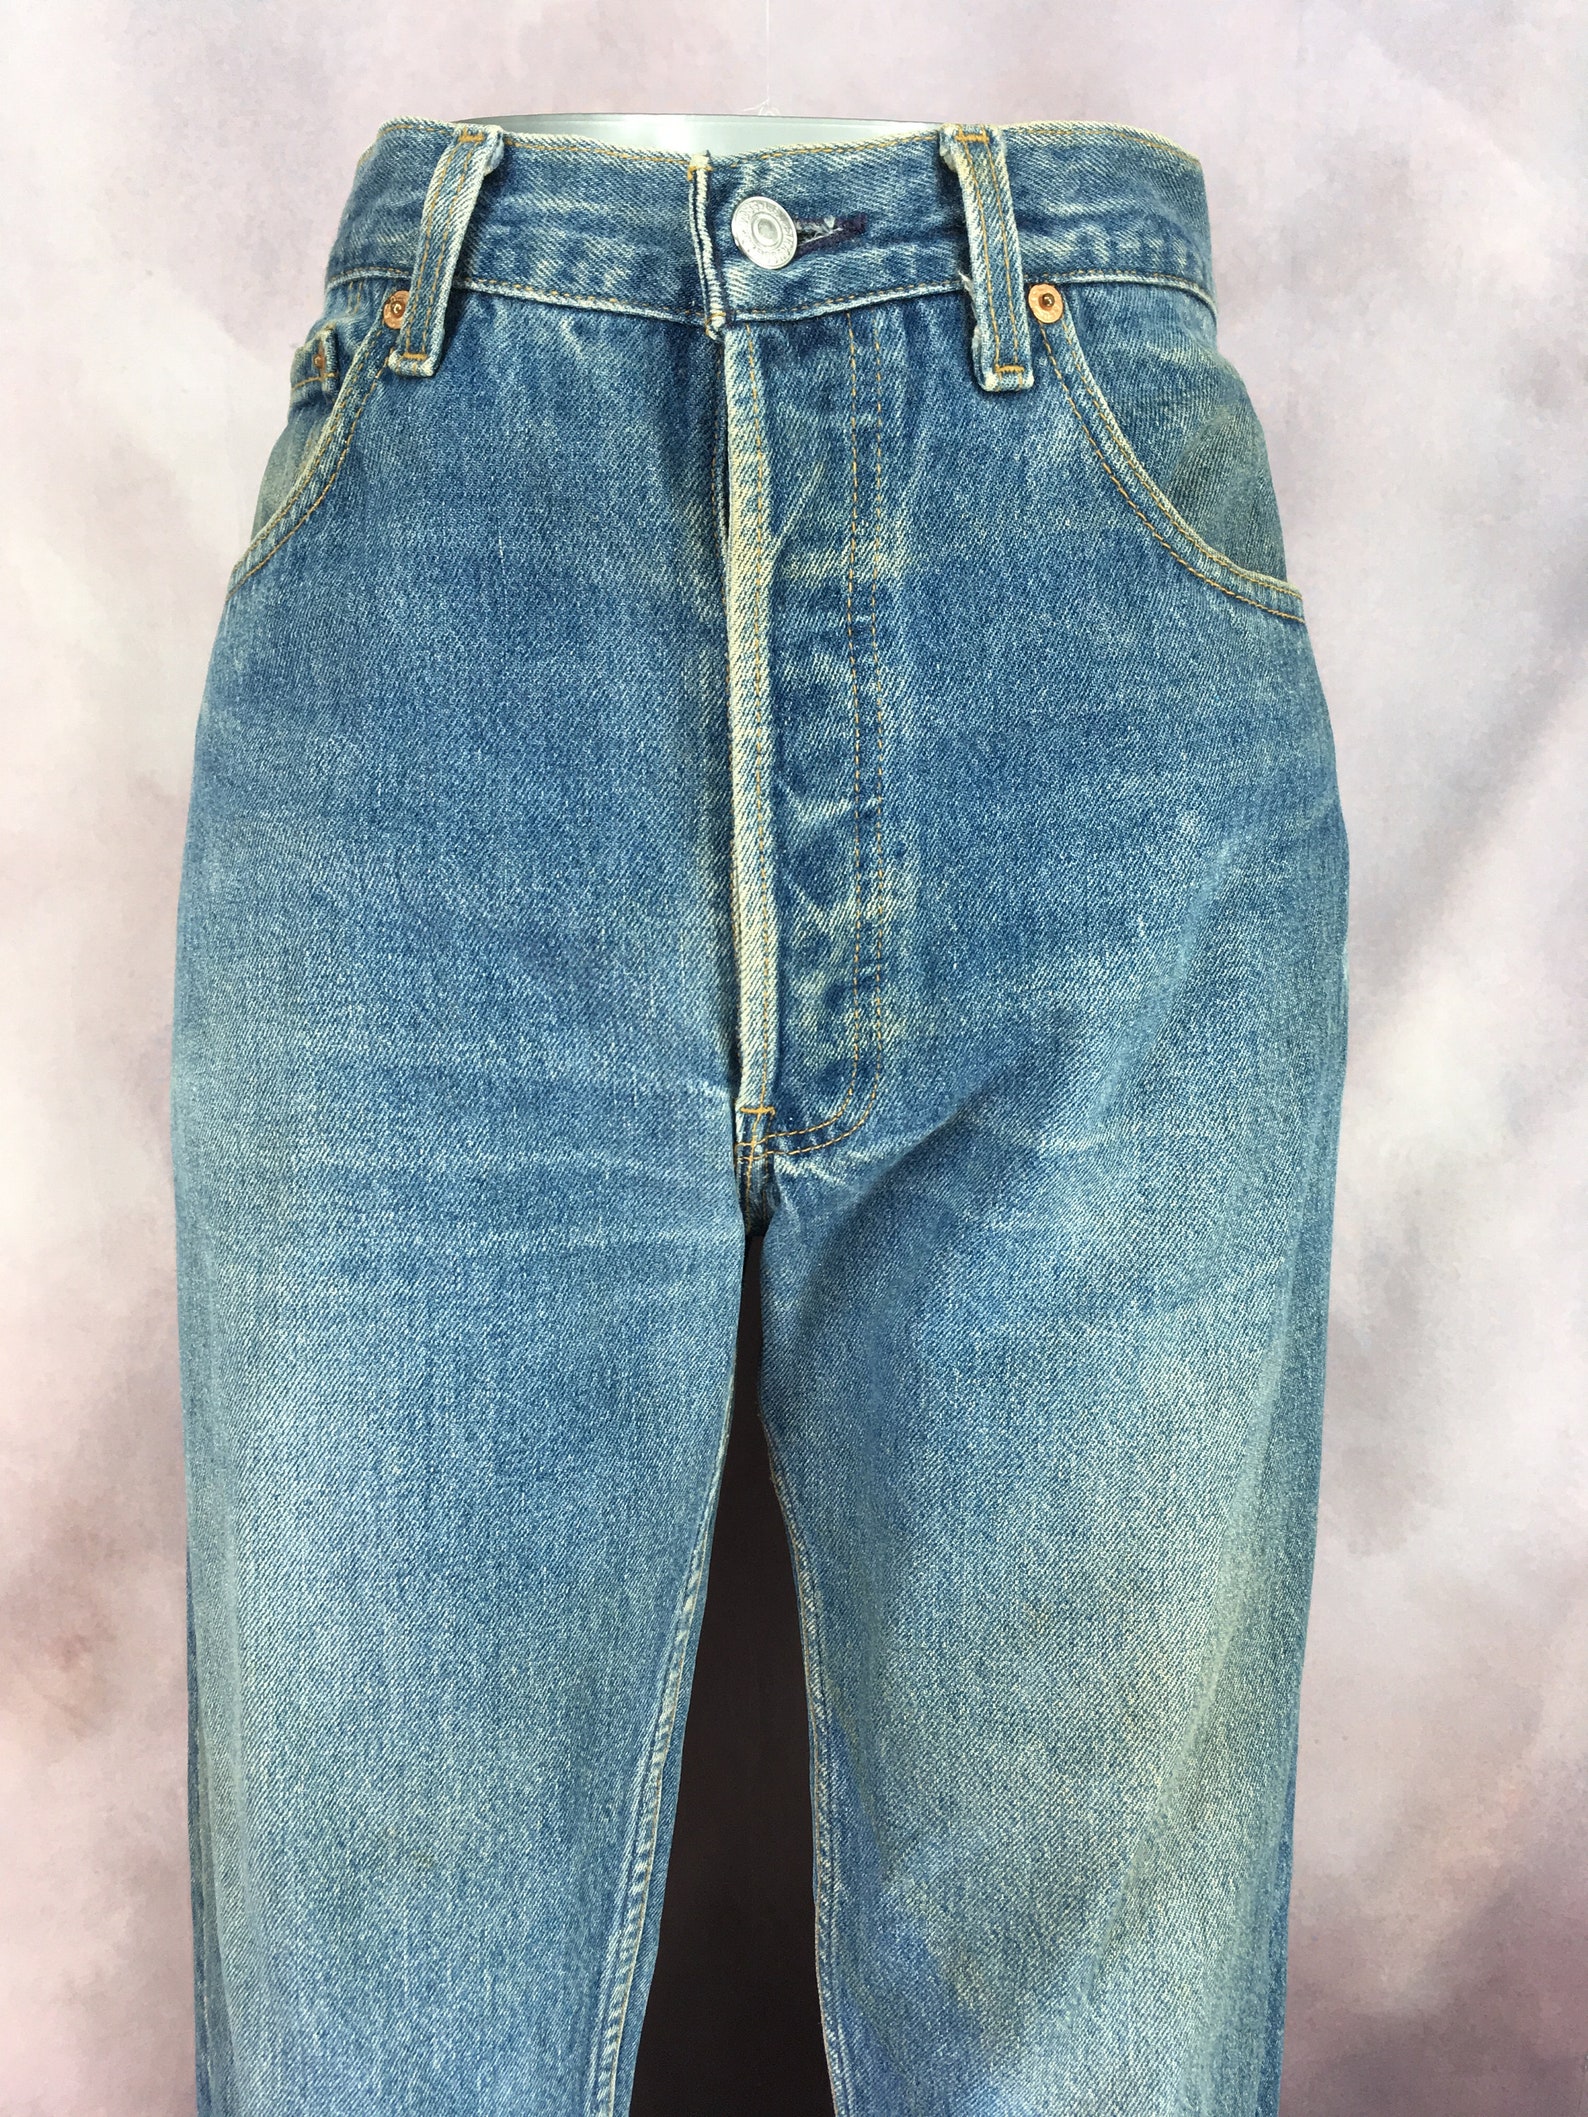 Waist 32 inch Vintage Levi's 550xx Jeans Blue Wash Made In | Etsy